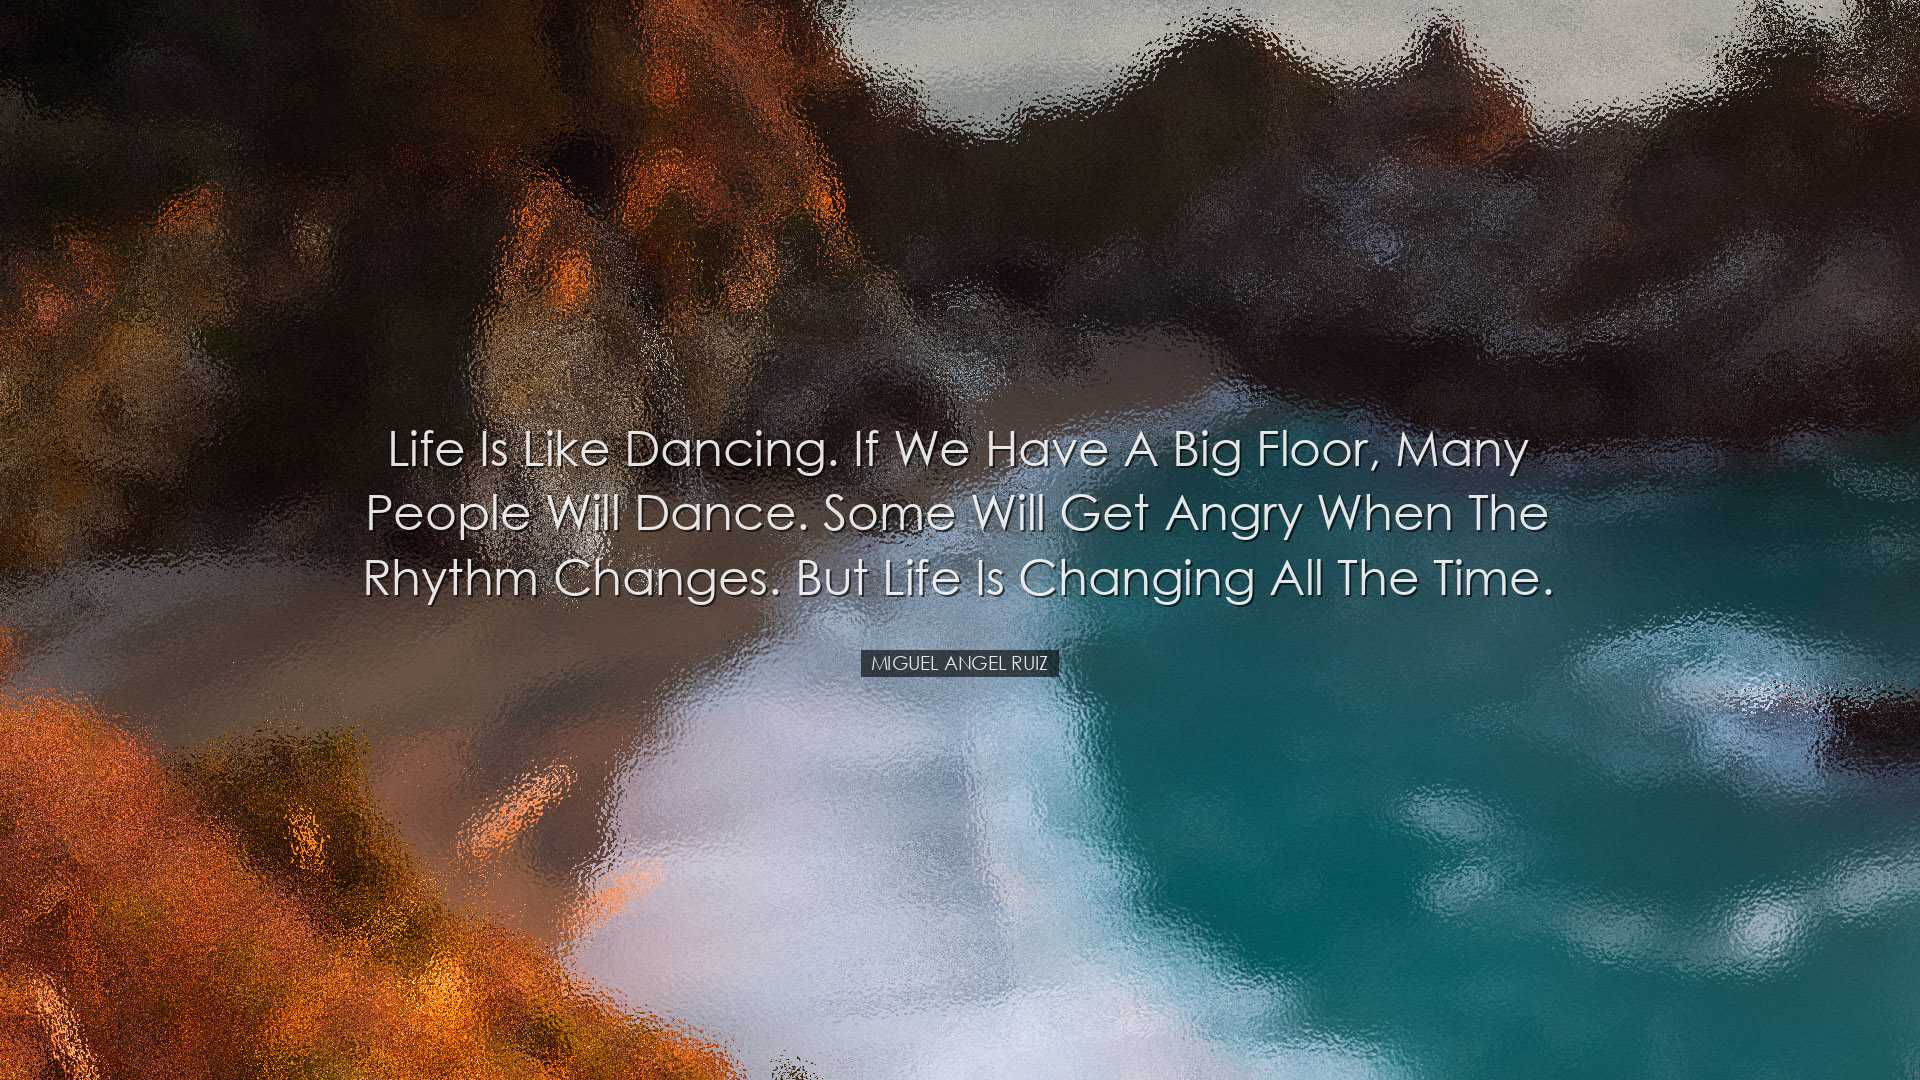 Life is like dancing. If we have a big floor, many people will dan